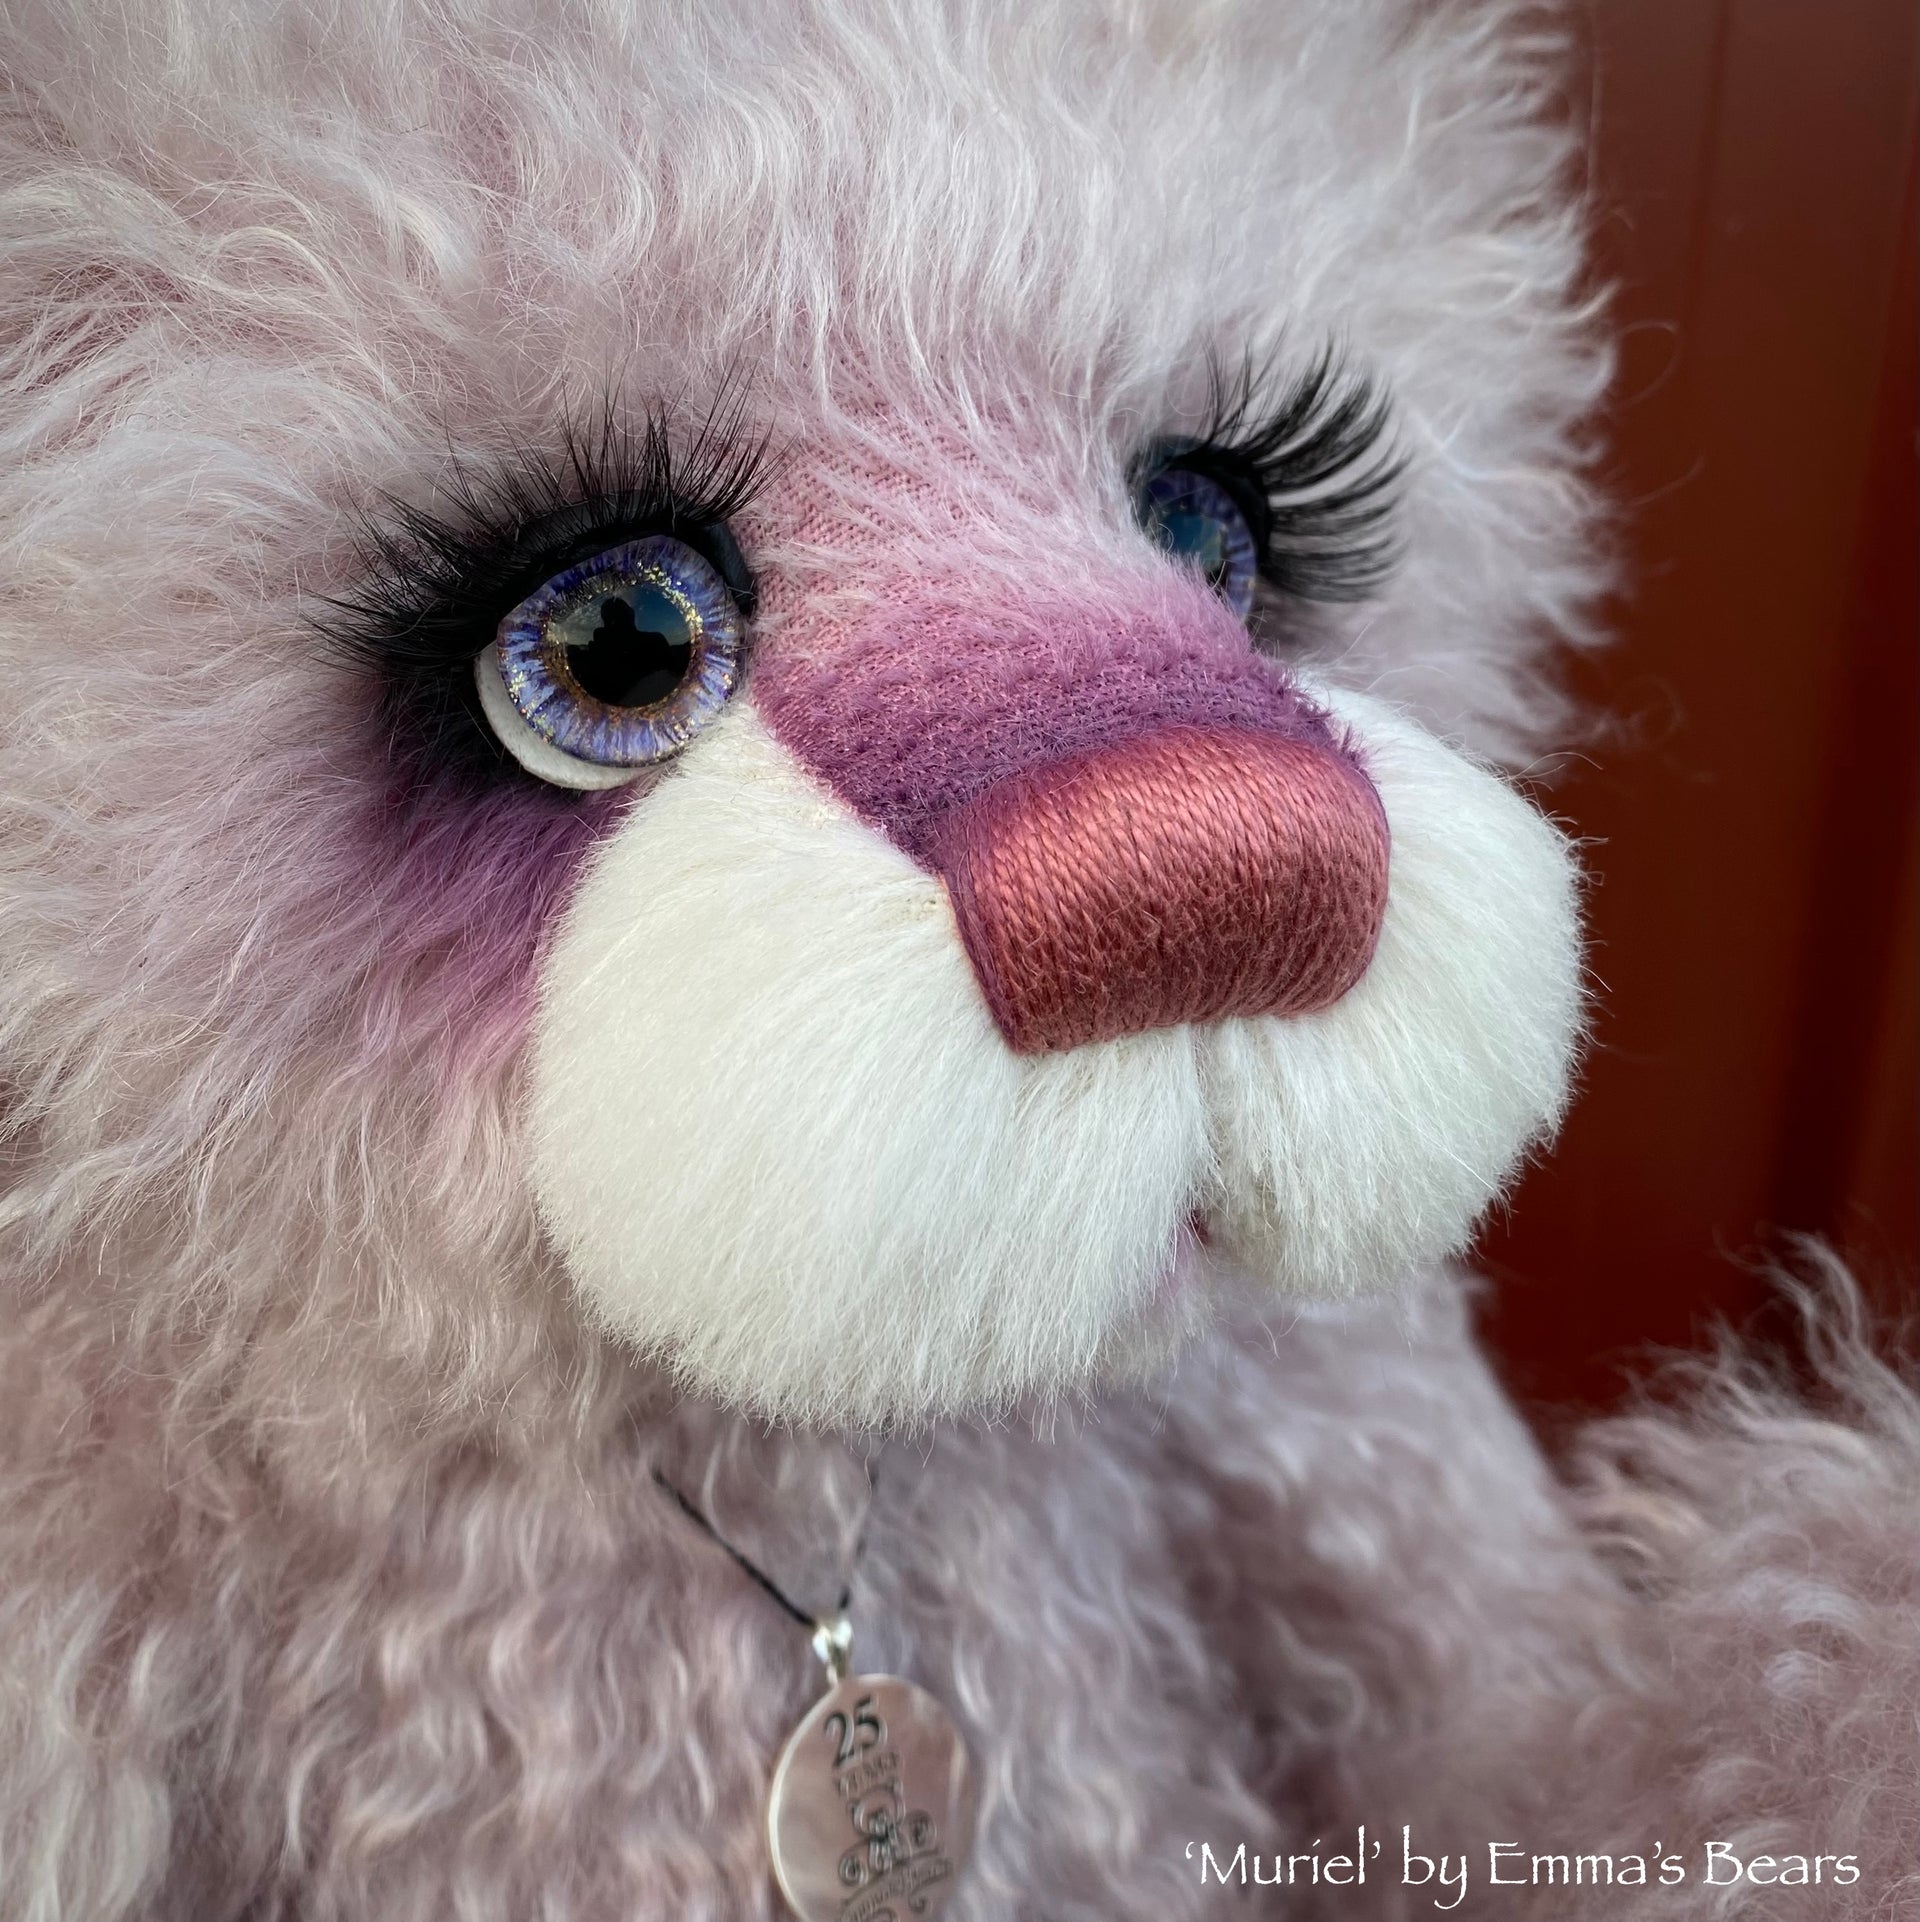 Muriel - 16" SPECIAL 25th Anniversary Collection Hand-dyed mohair Artist Bear by Emmas Bears - OOAK